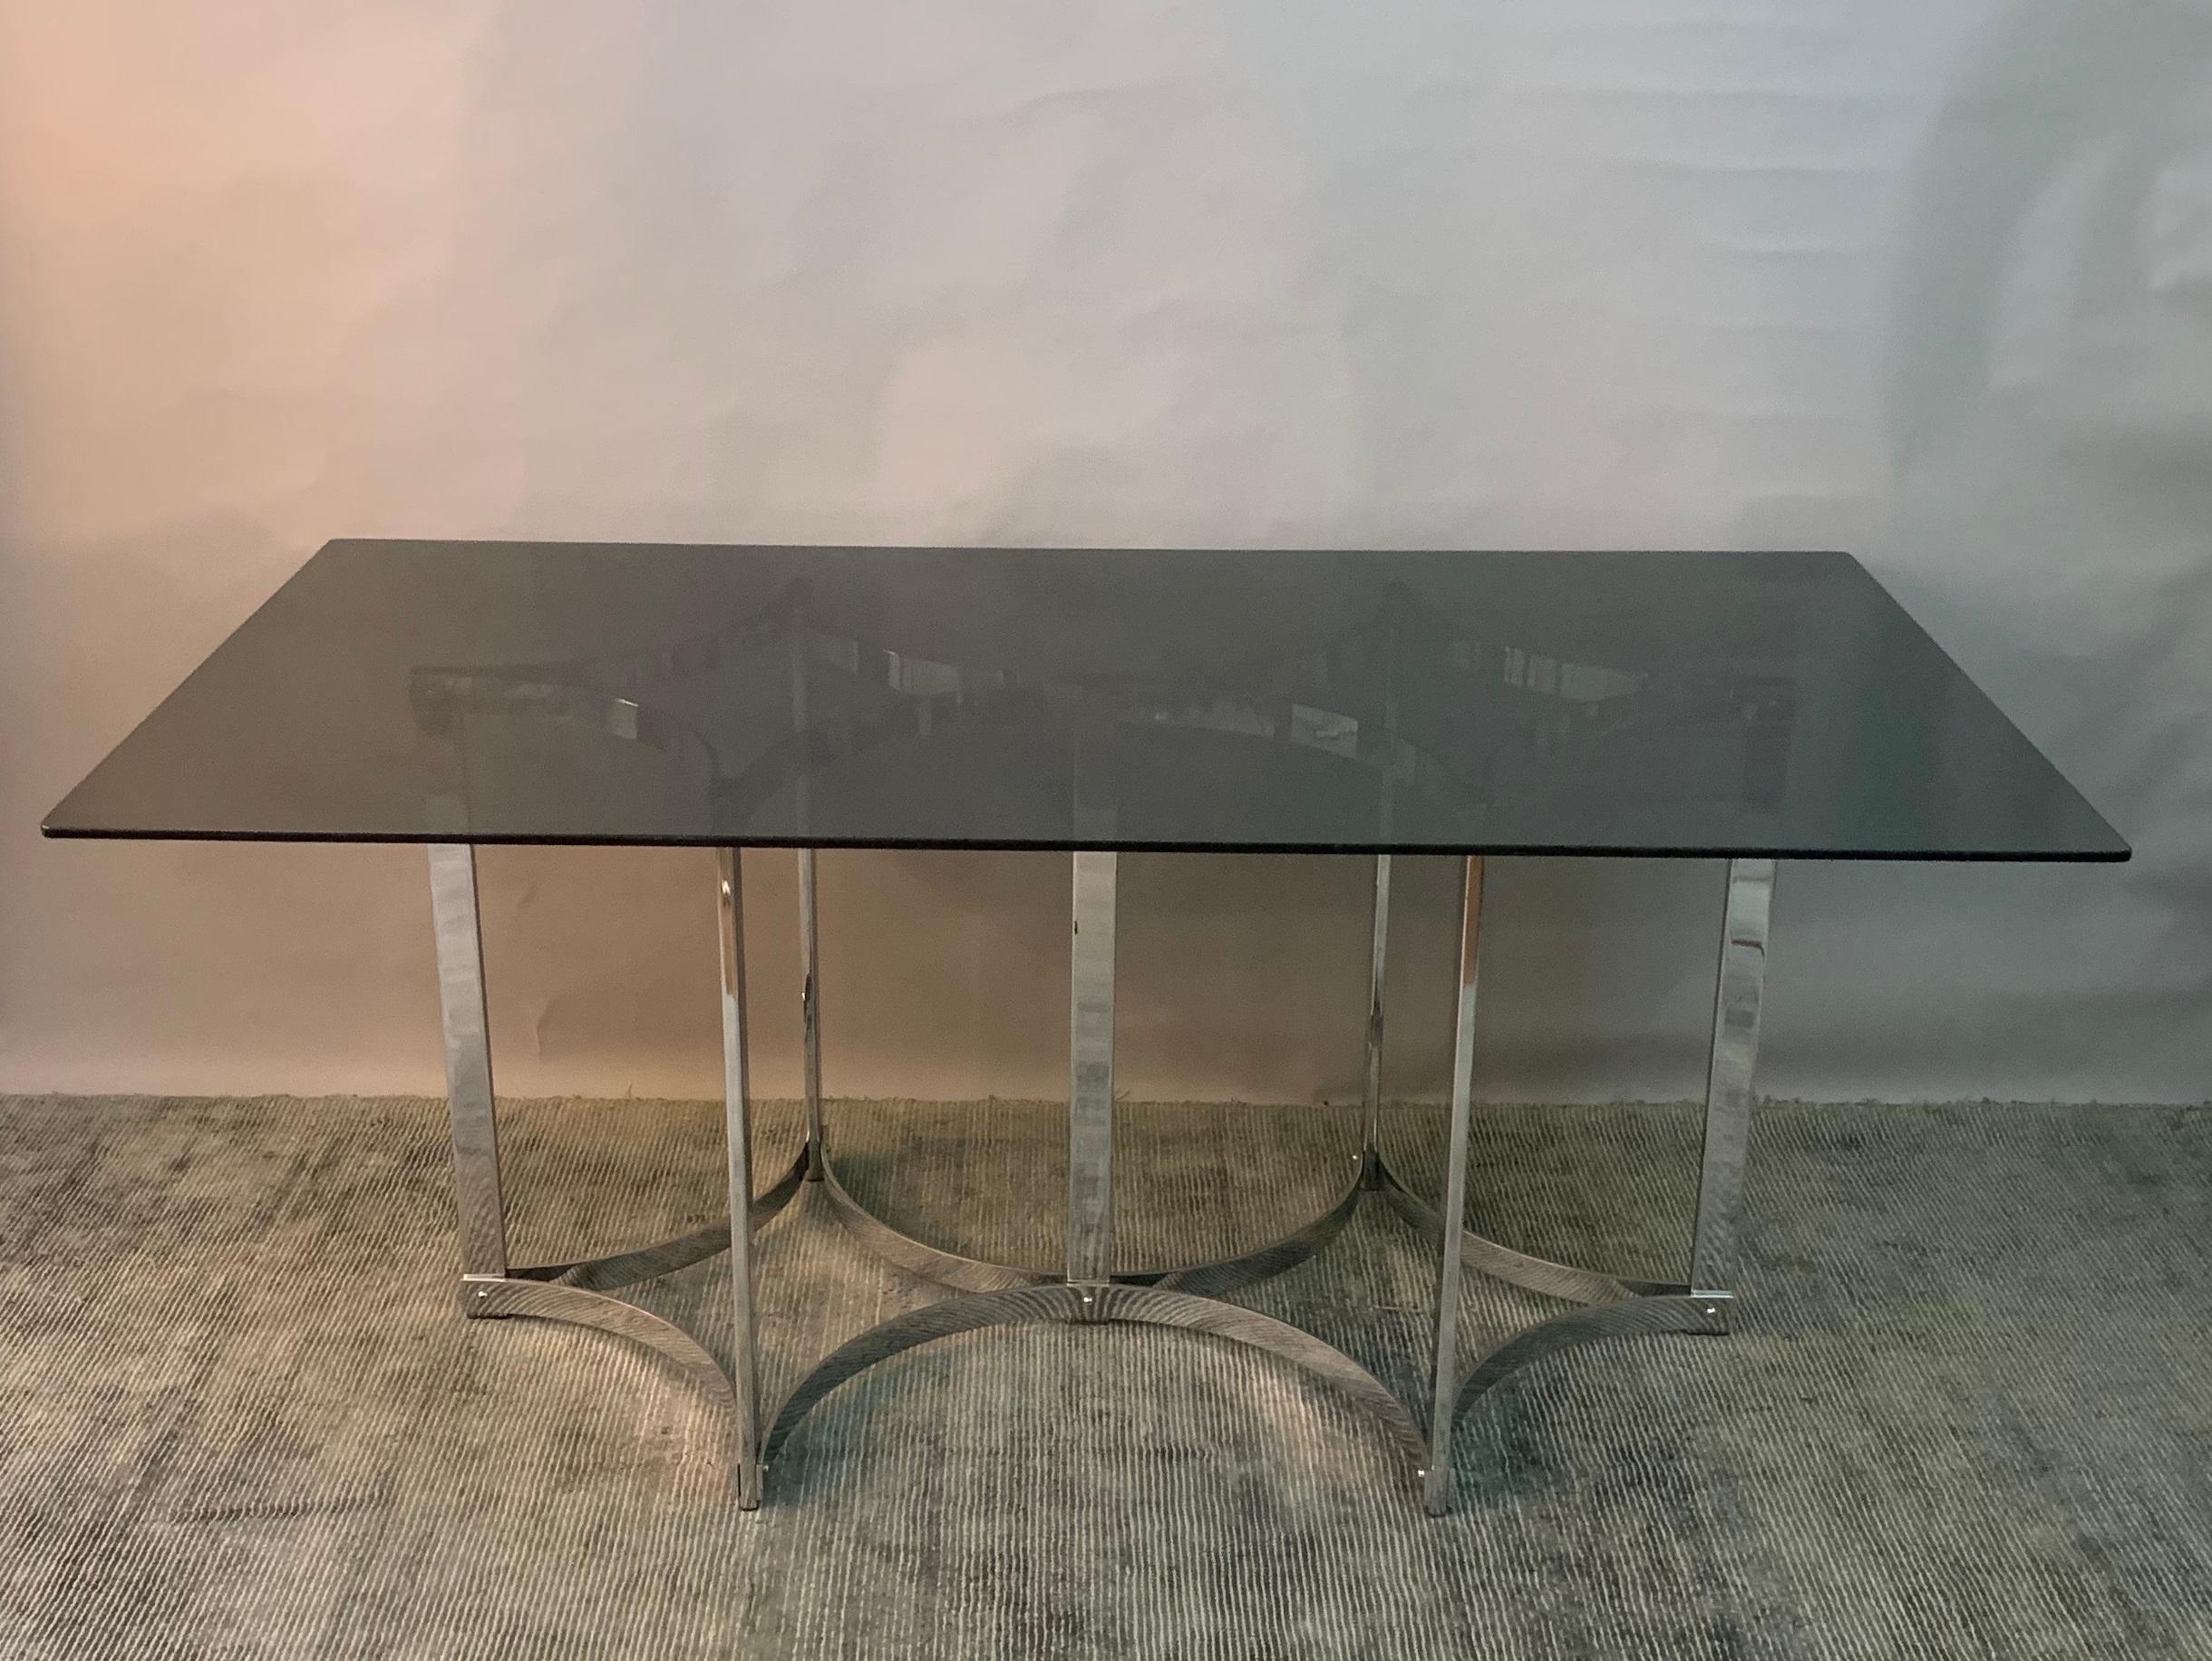 1970s dining table manufactured by upmarket manufacturer Merrow Associates designed by Richard Young. British made. The toughened smoked glass top sits on a double connecting star shaped chrome base. In very good vintage condition with some hardly